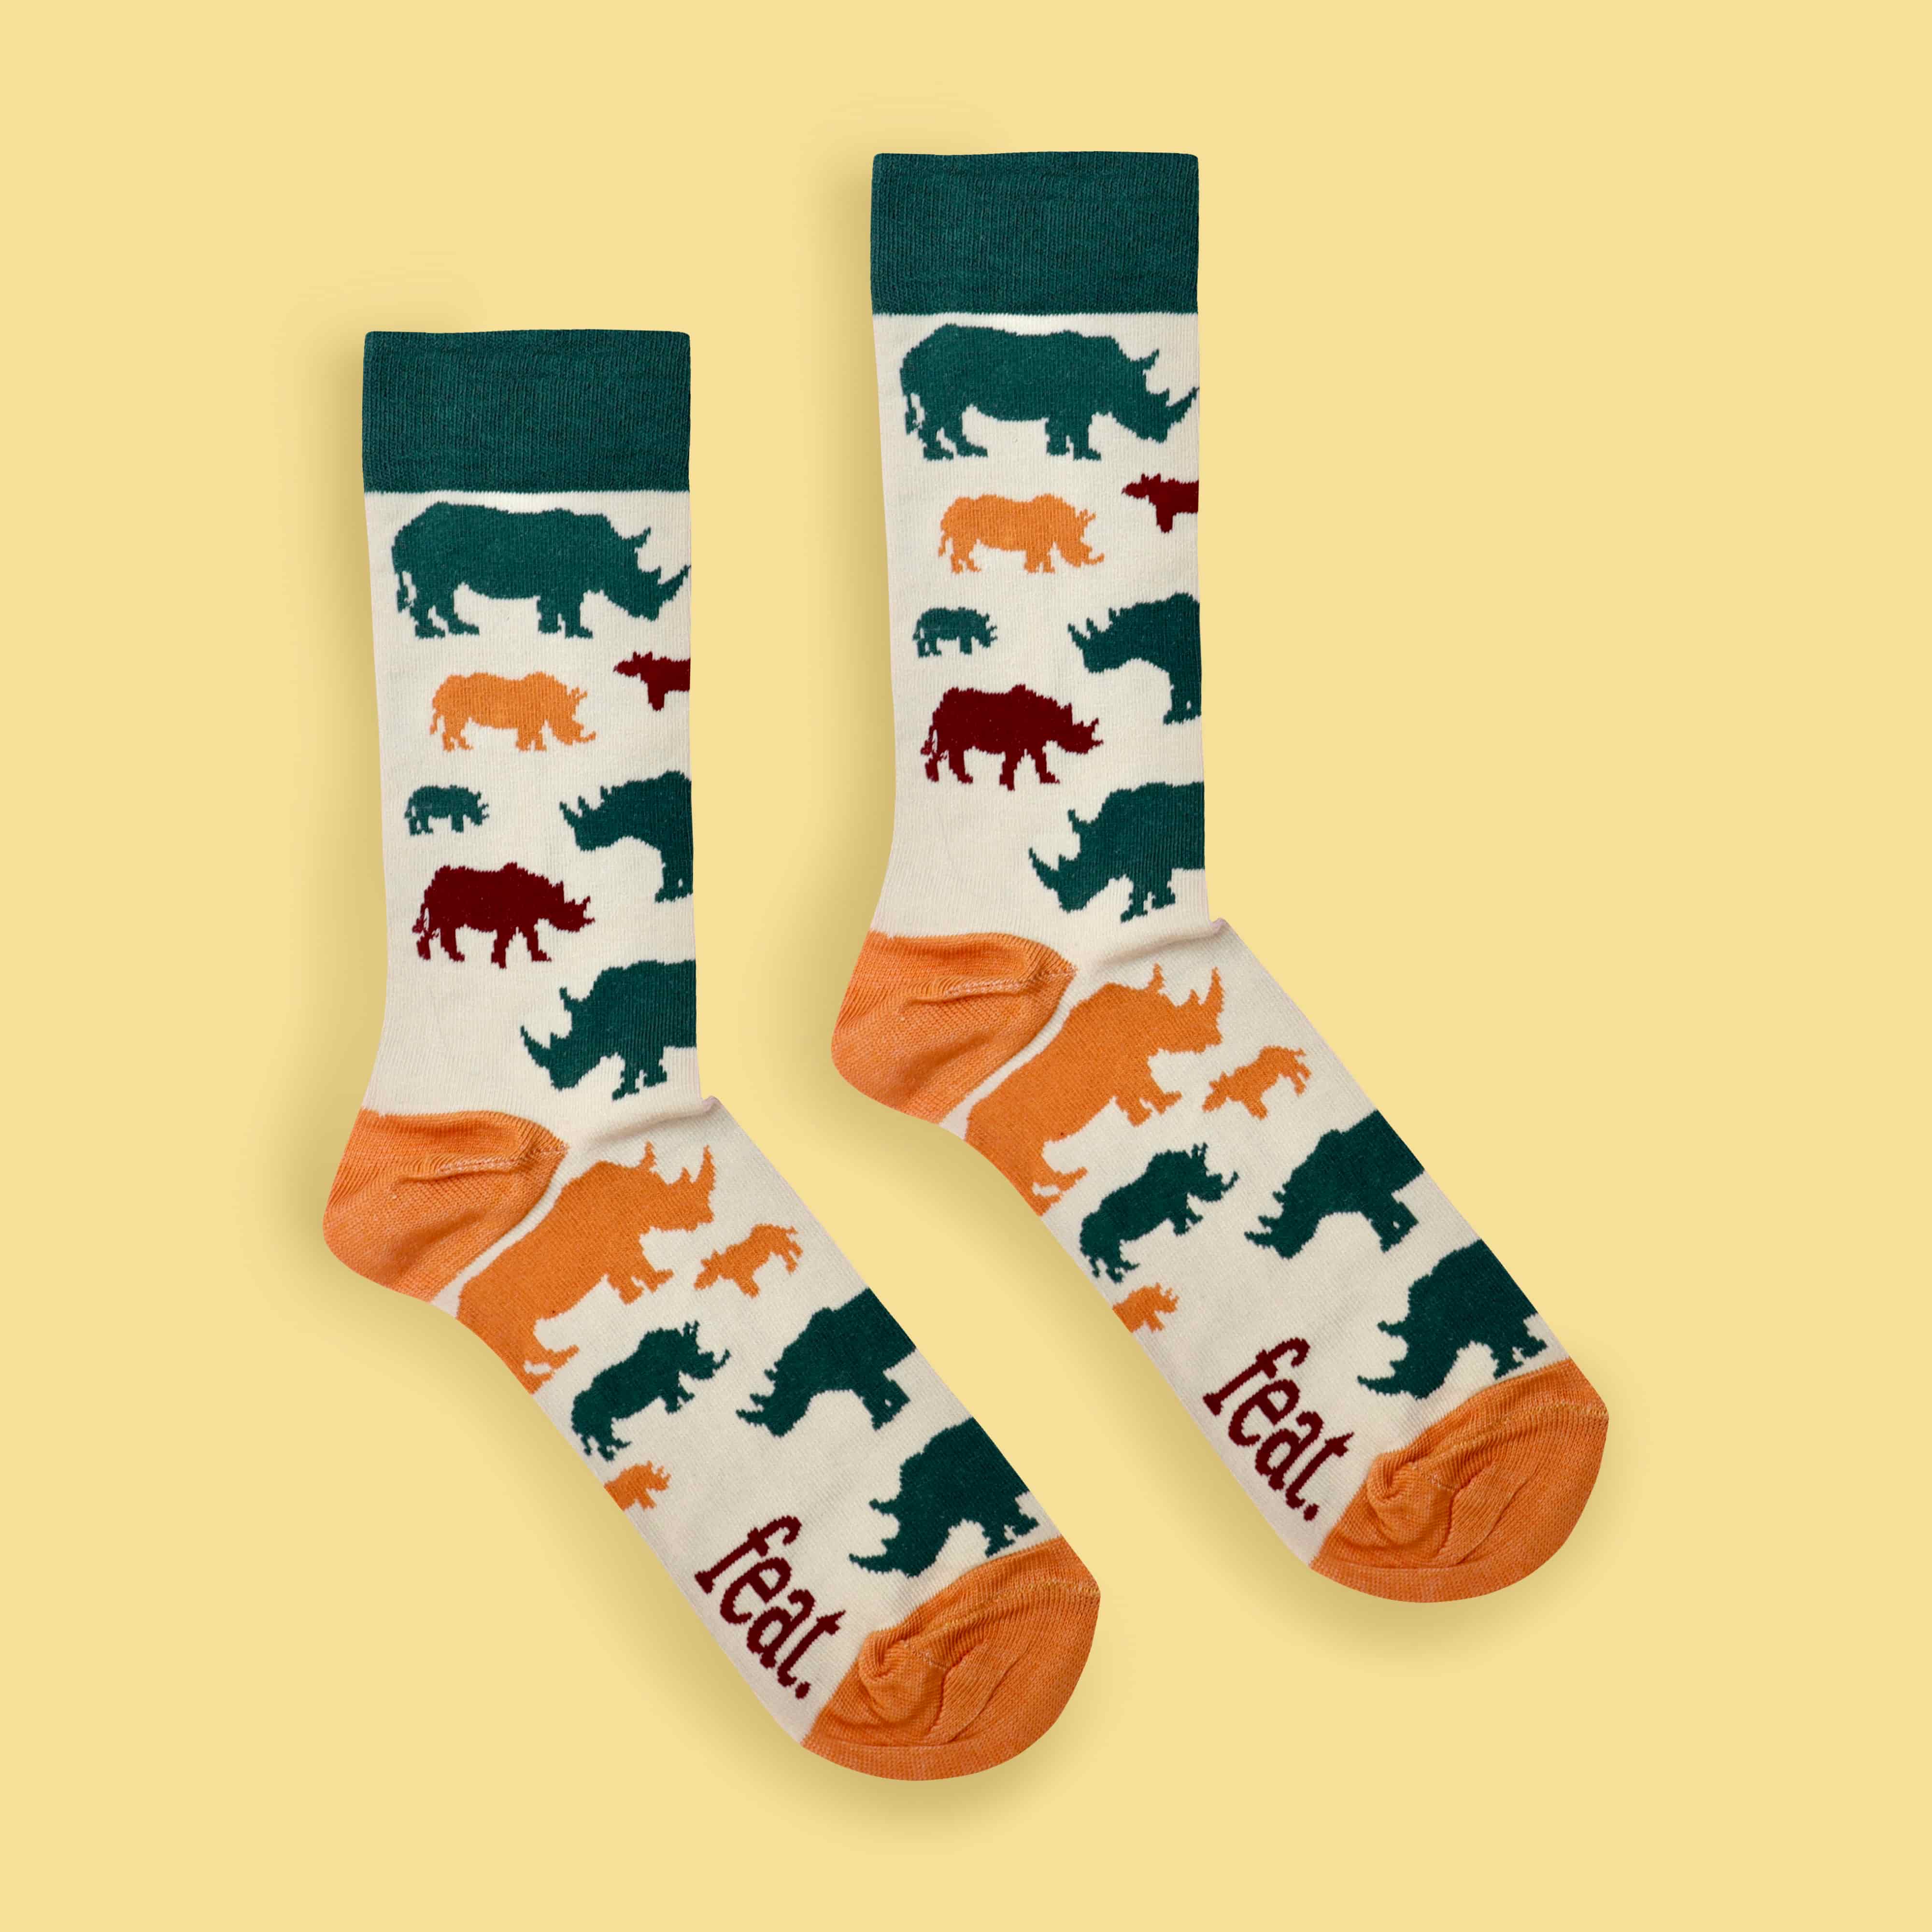 Milk and forest rhino socks yellow background right